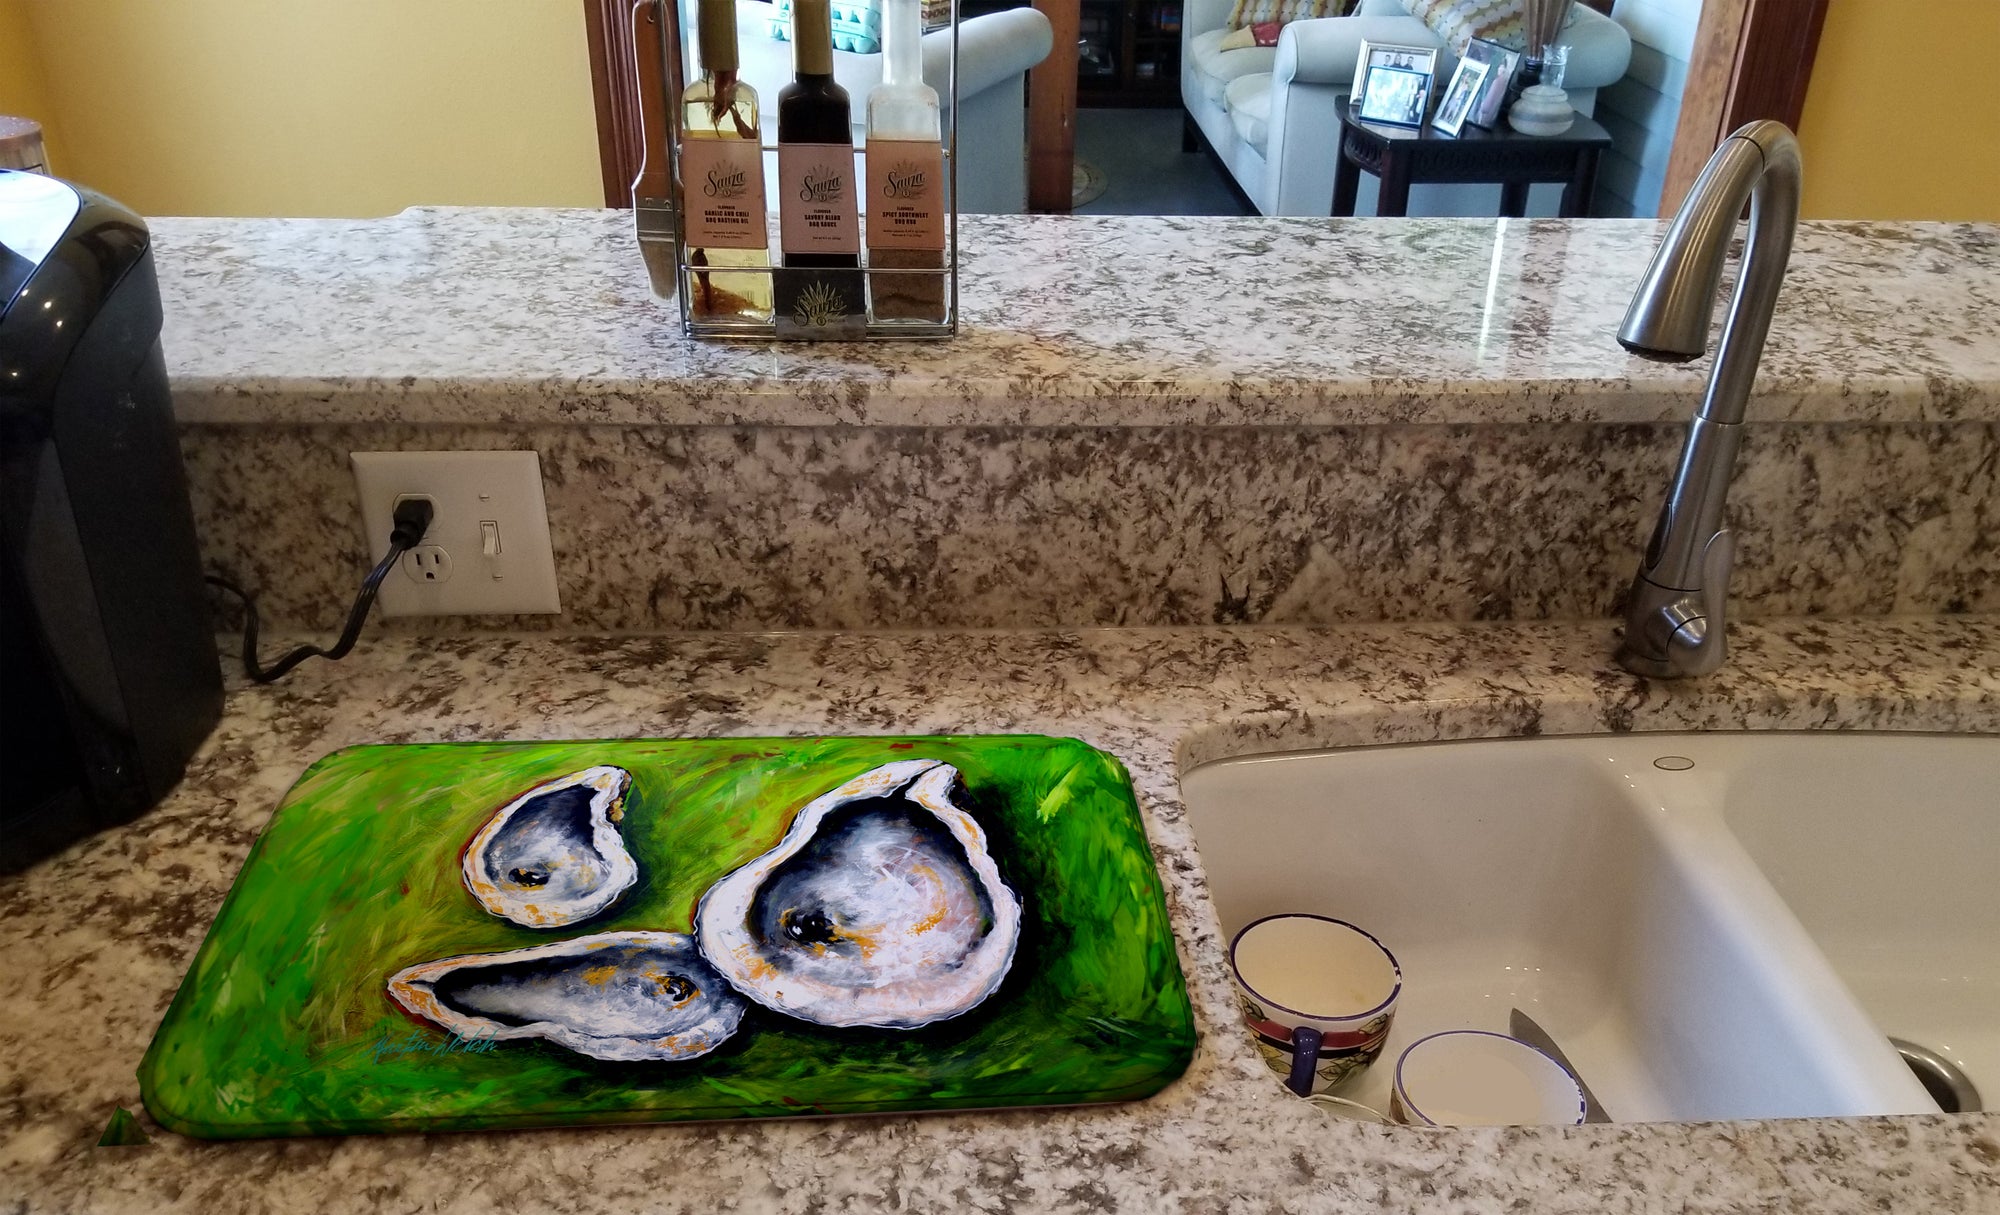 All Shucked Oysters Dish Drying Mat